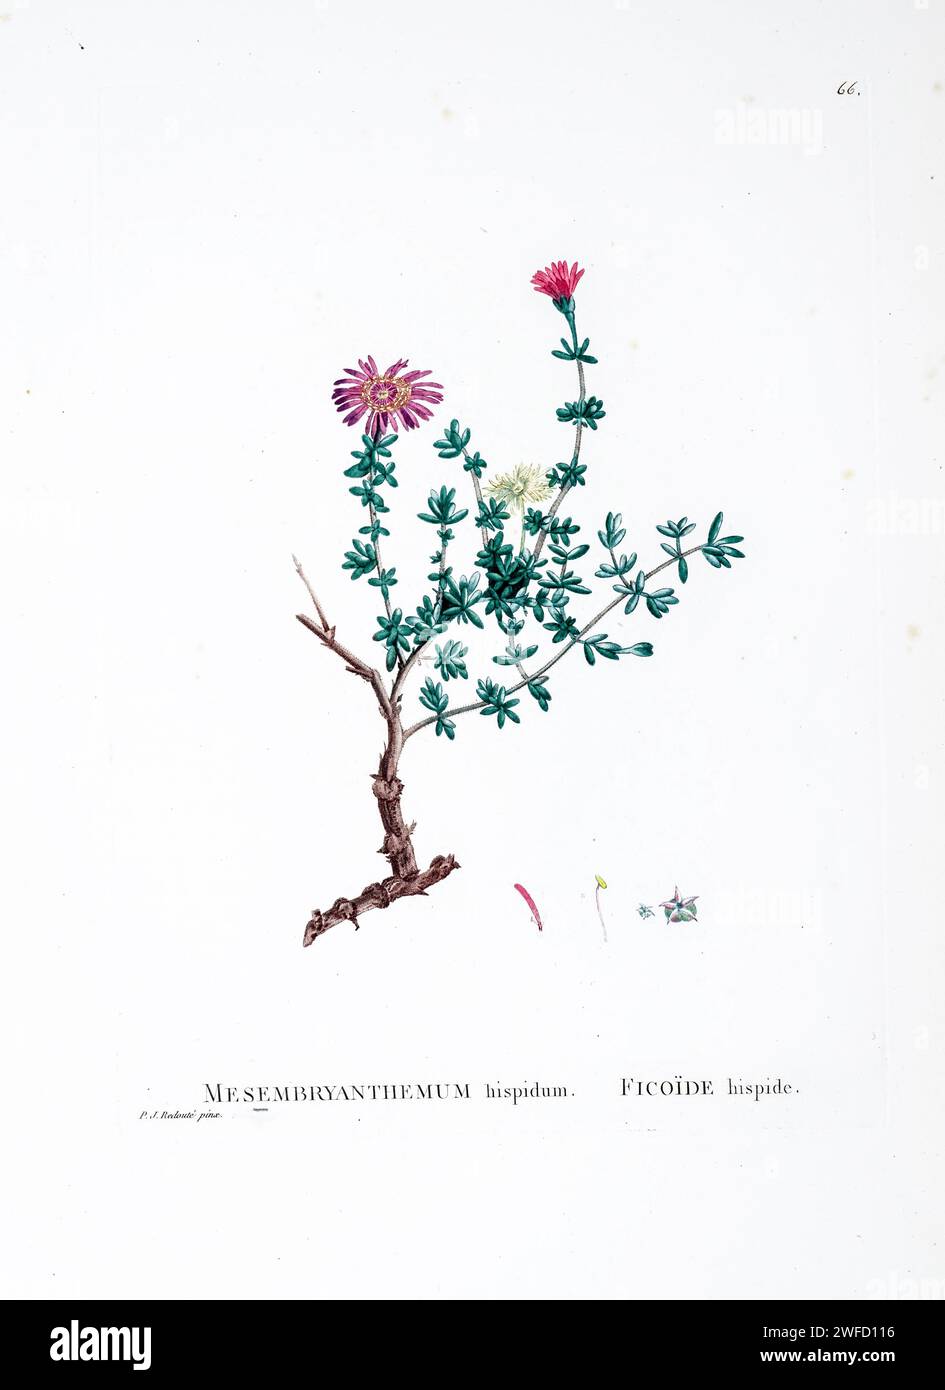 Drosanthemum hispidum (L.) Schwant. Here As Mesembryanthemum hispidum from History of Succulent Plants [Plantarum historia succulentarum / Histoire des plantes grasses] painted by Pierre-Joseph Redouté and described by Augustin Pyramus de Candolle 1799 Drosanthemum hispidum, the hairy dewflower, is a species of perennial herb in the family Aizoaceae. They are succulent plants and have a self-supporting growth form and simple, broad leaves. Flowers are visited by Colletes schultzei. Stock Photo